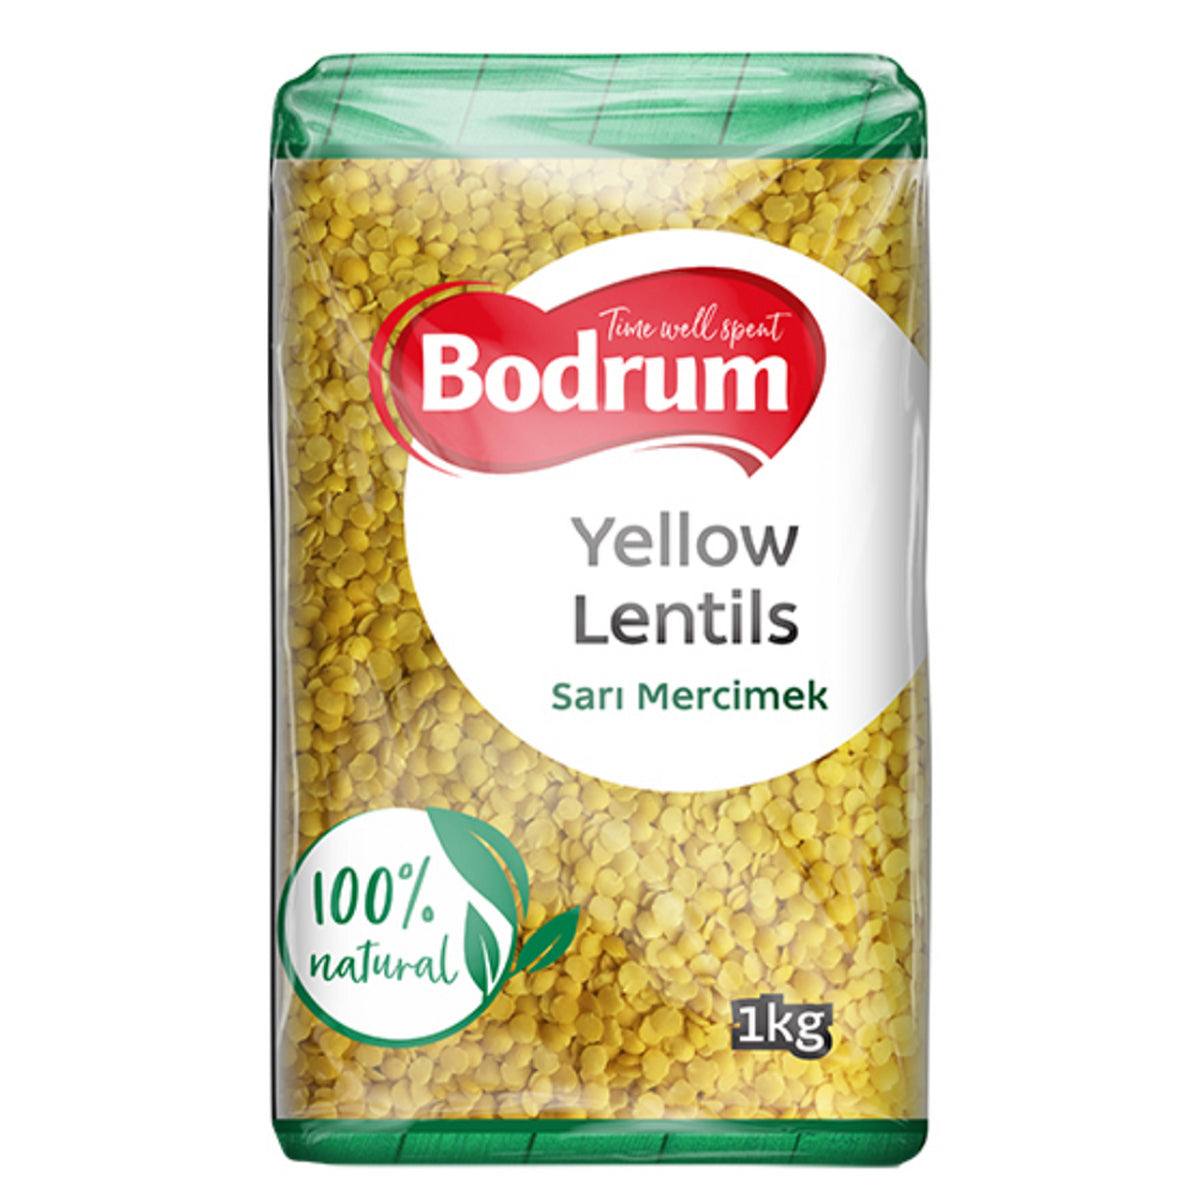 Bodrum -  Yellow Lentils - 1kg - Continental Food Store